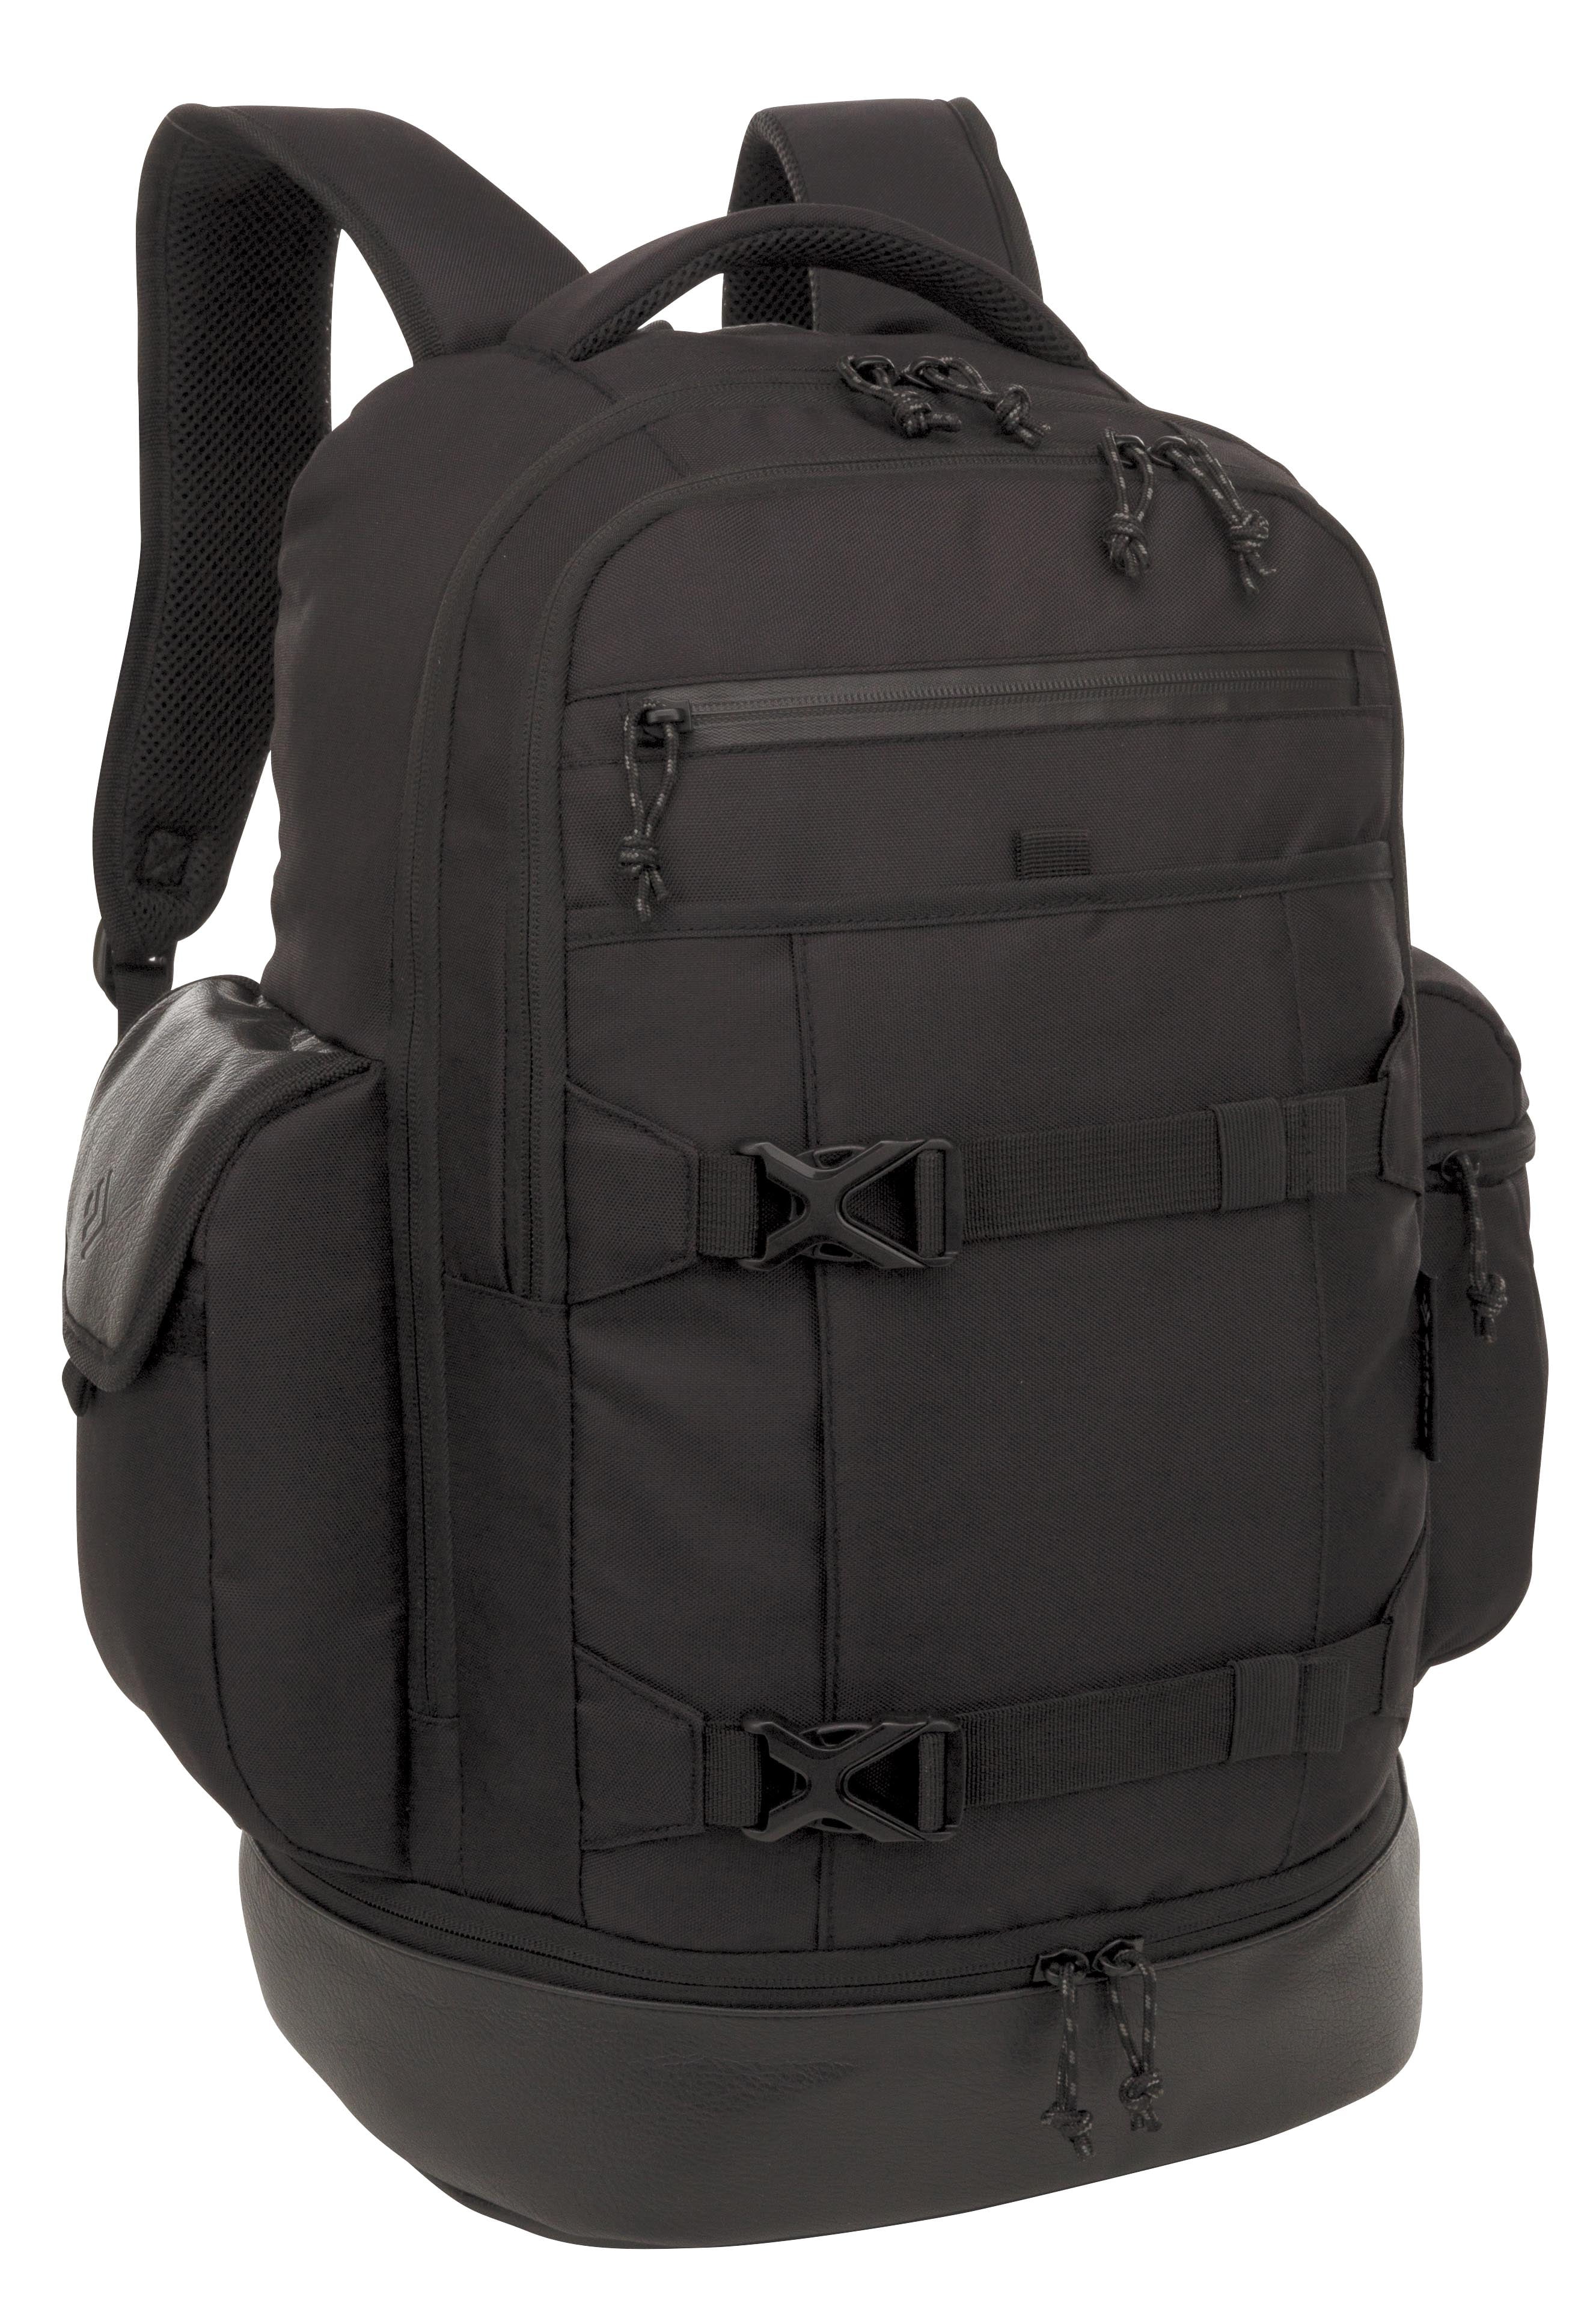 Outdoor Products - Outdoor Products Weekender 32 Ltr Backpack, Black ...